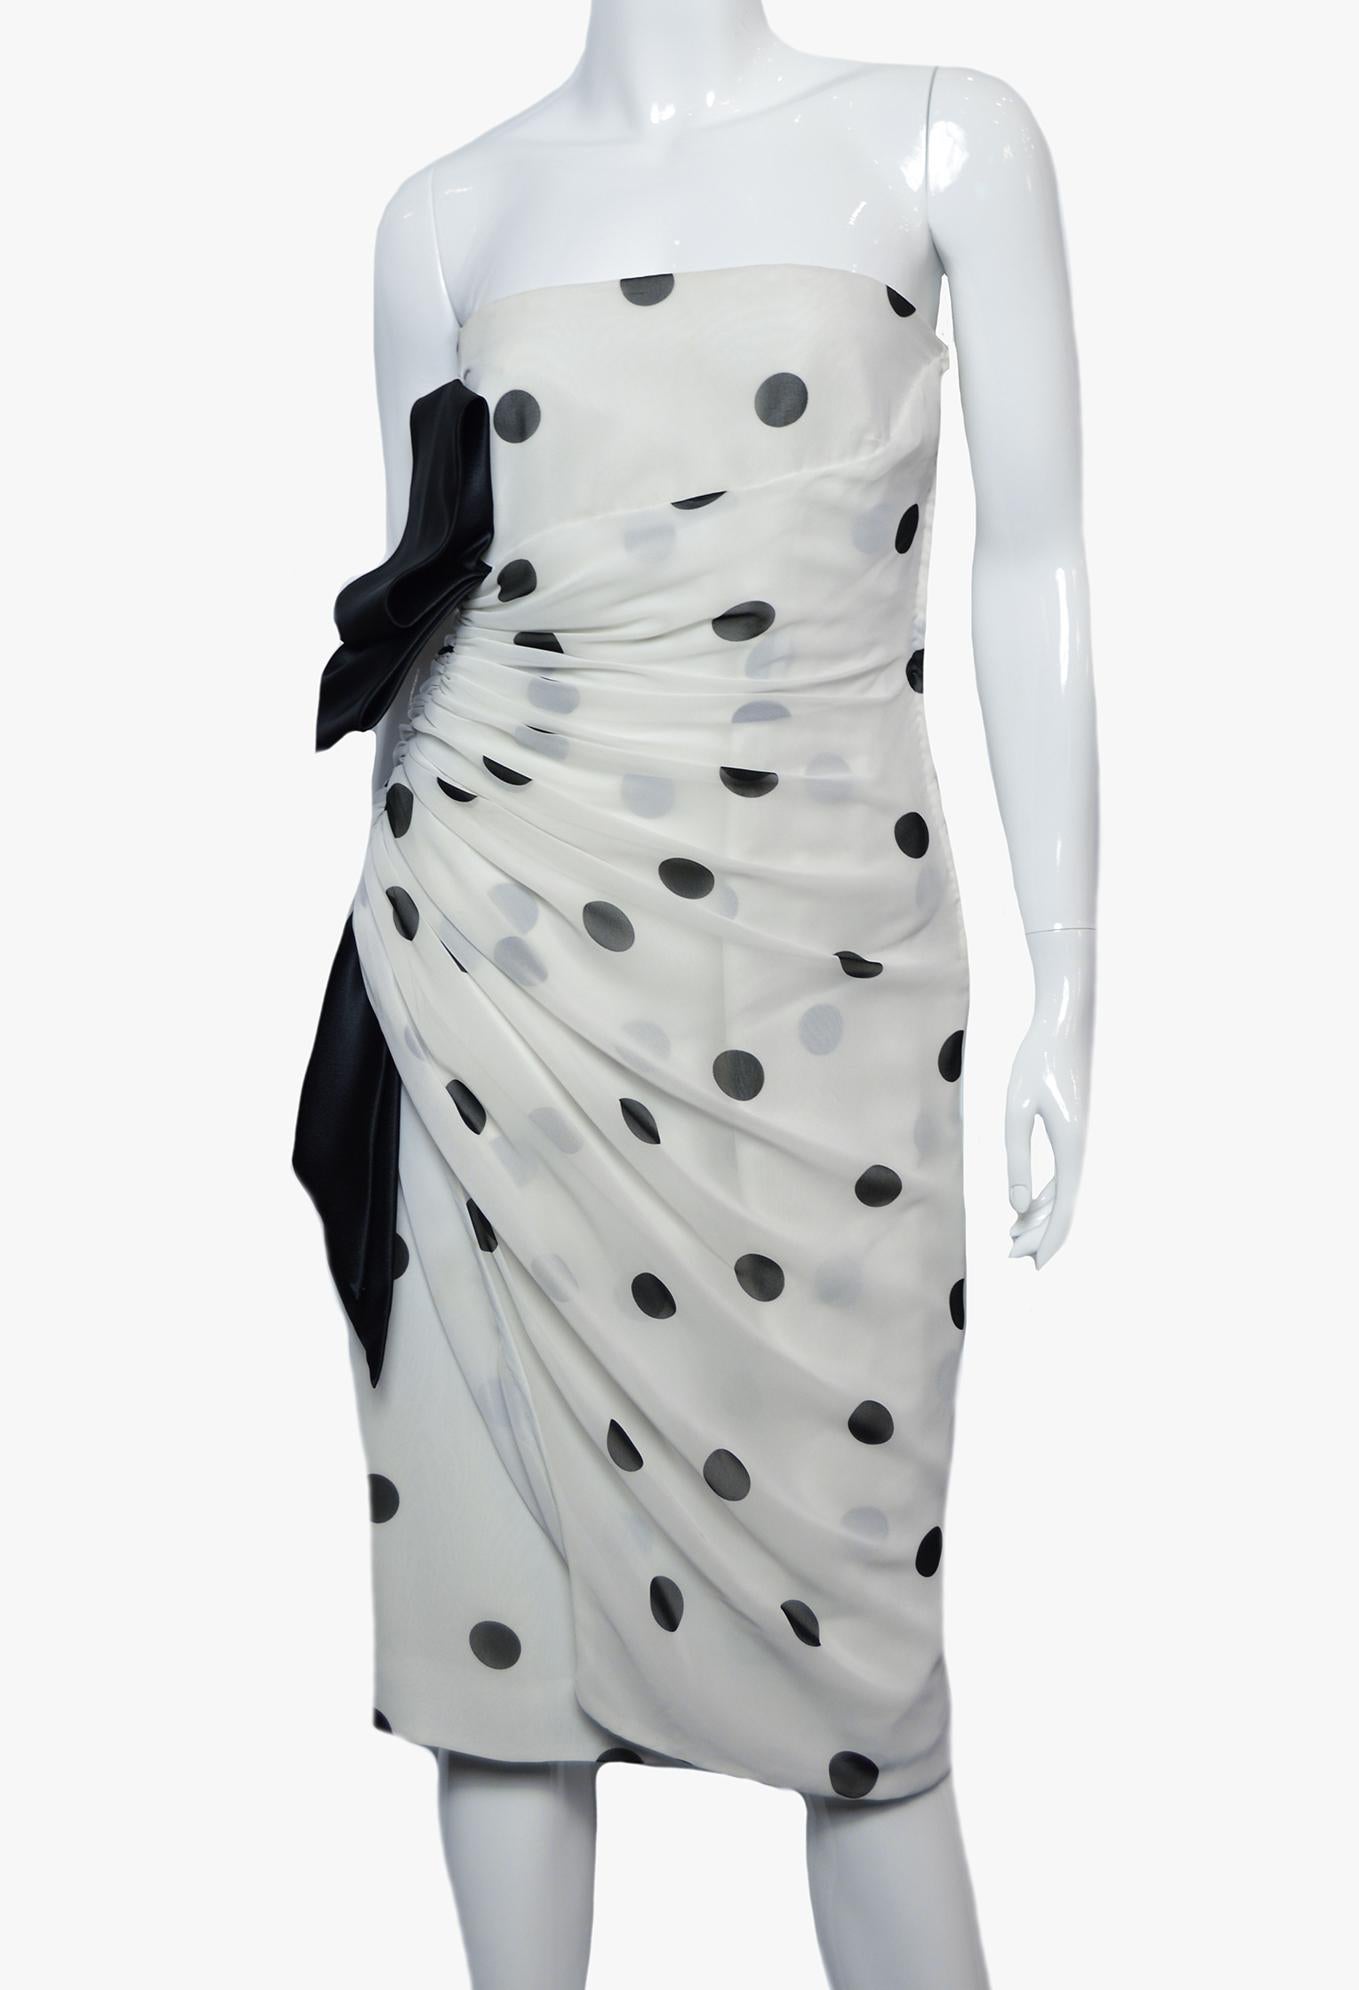 Beautiful vintage 1980’s black and white strapless dress, timeless dress.

Additional information:
Material: Composition tag removed
Size M-L, please refer to the measurements below.
Length: 84 cm/ 33″
Bust: 90 cm/ 35,4″
Waist: 82 cm / 32″
Bones